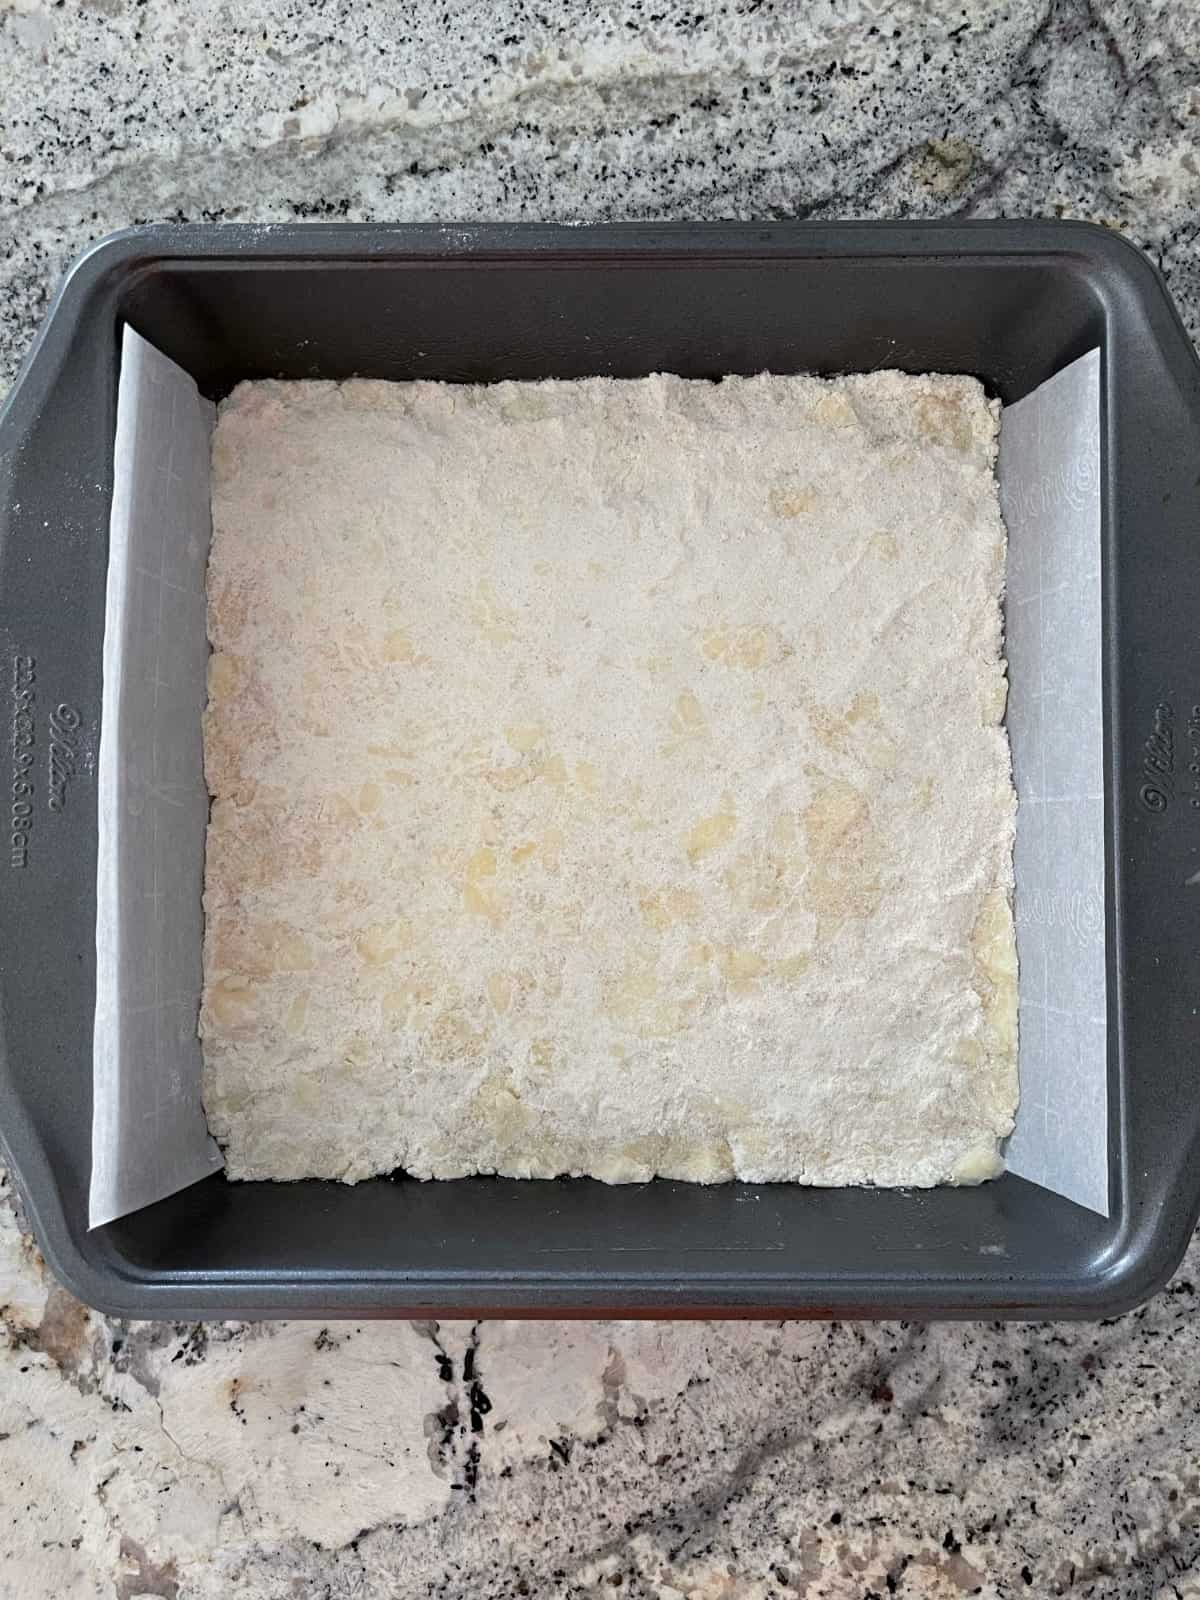 Unbaked lemon zest in a square baking dish lined with parchment paper.